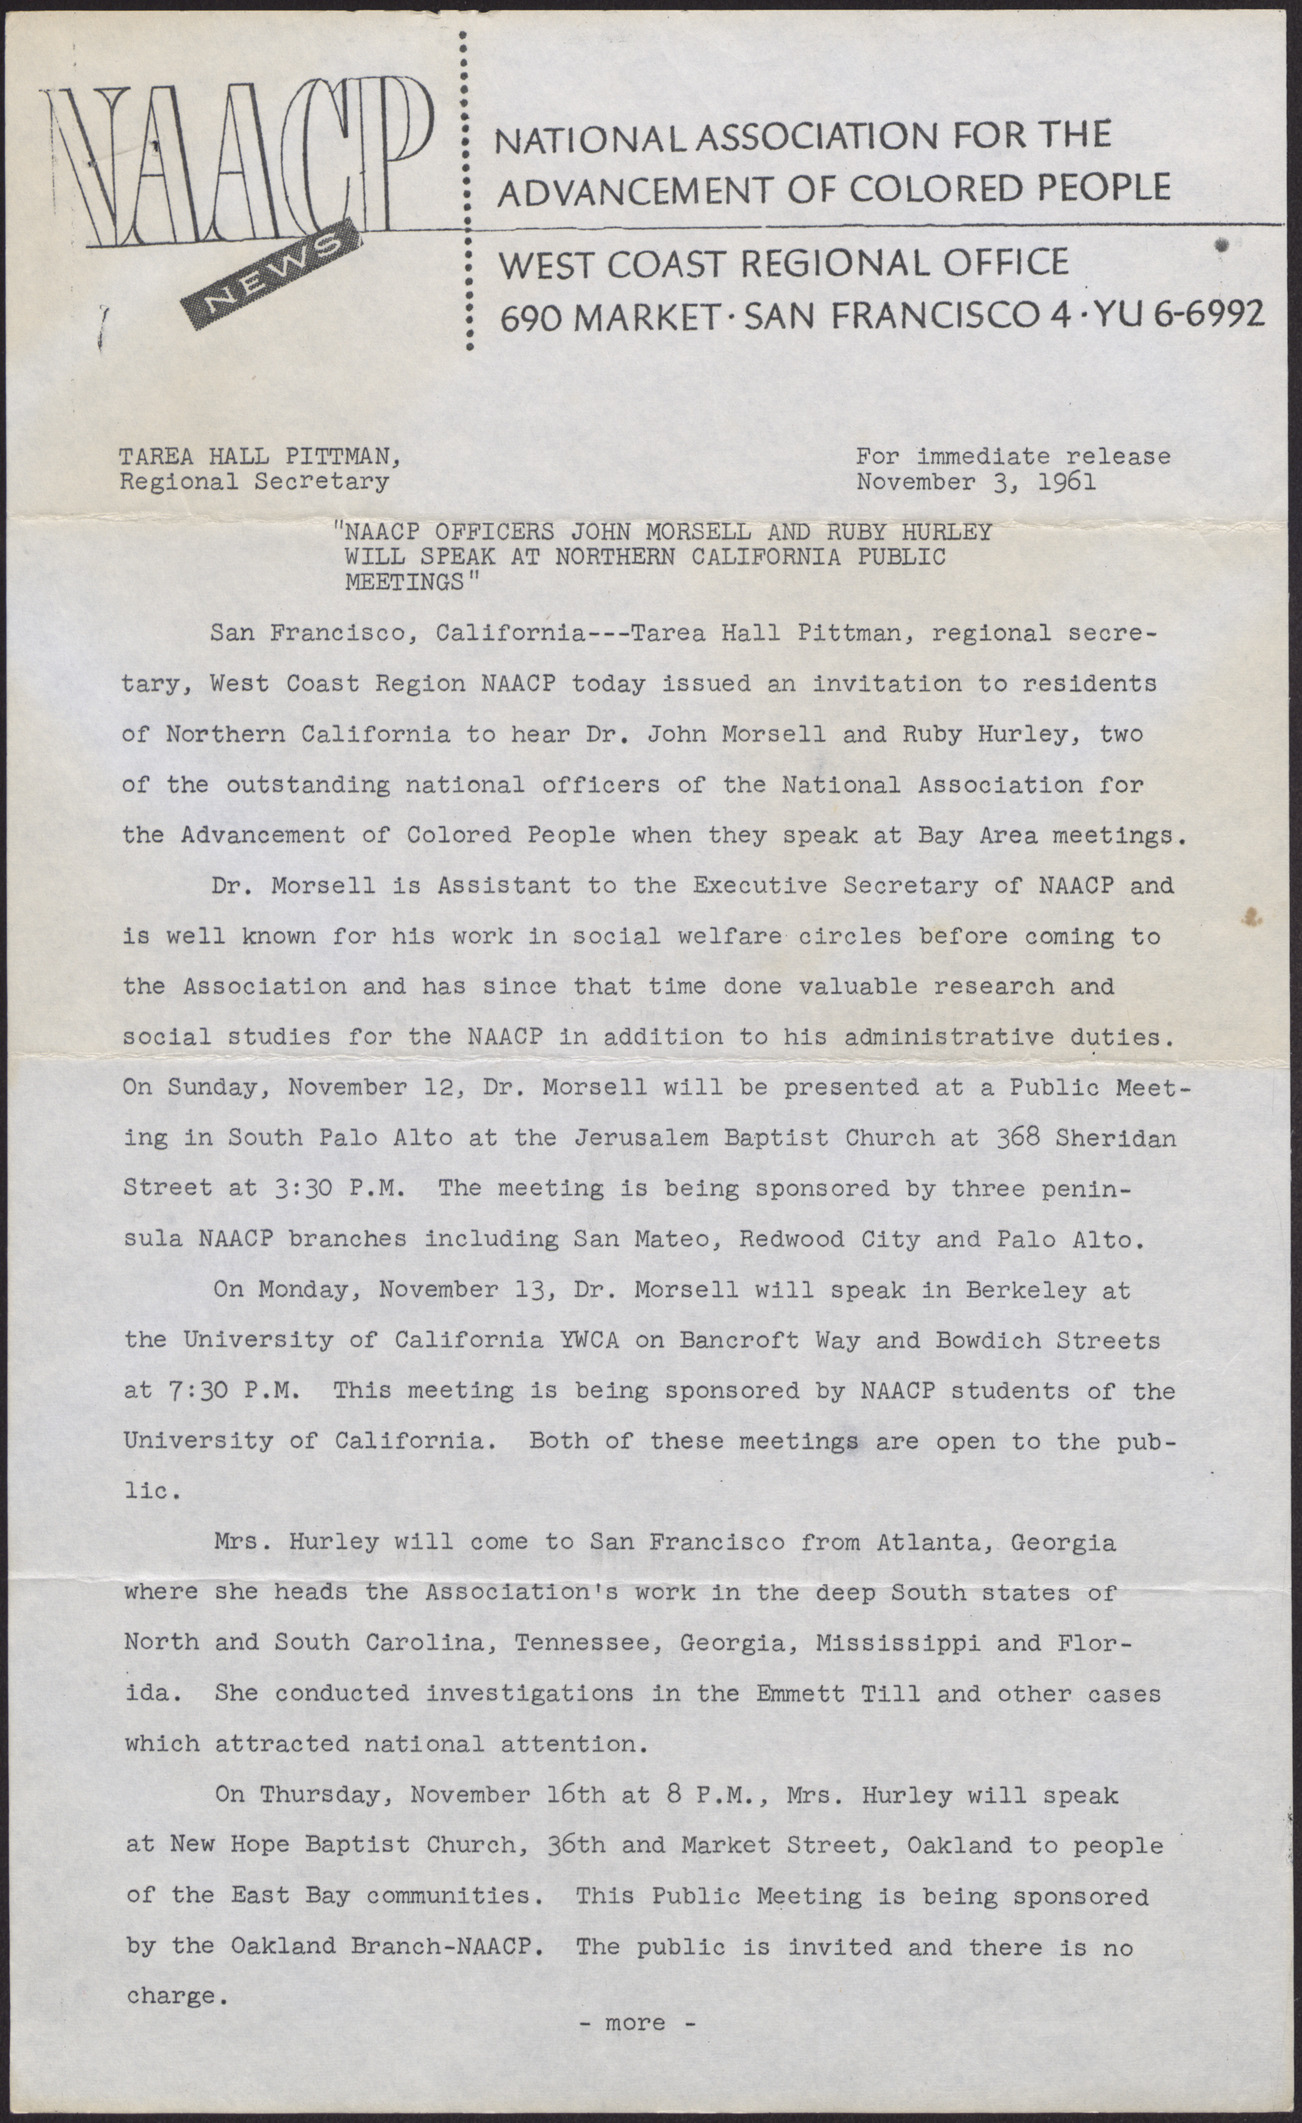 NAACP news letter (3 pages), November 3, 1961